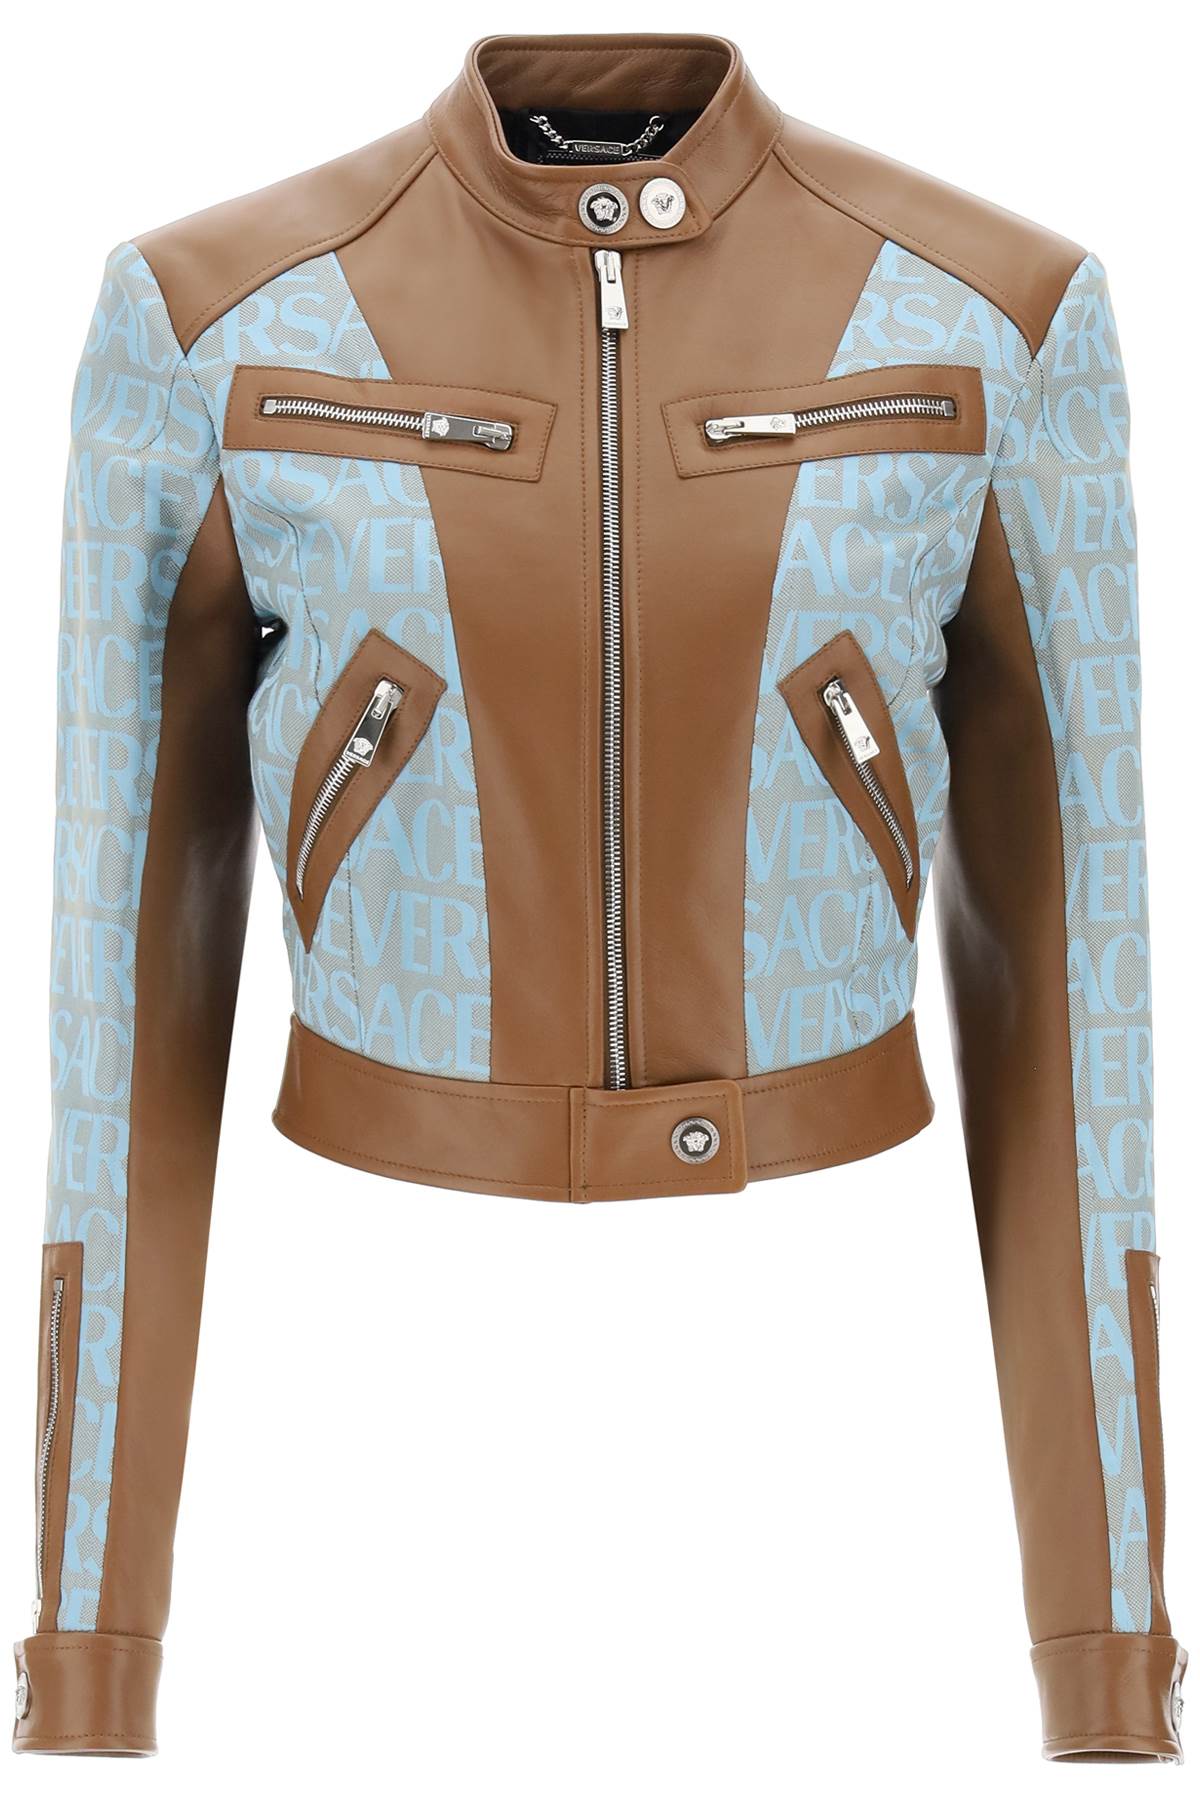 VERSACE Allover Lamb Leather Biker Jacket in Mixed Colors for Women